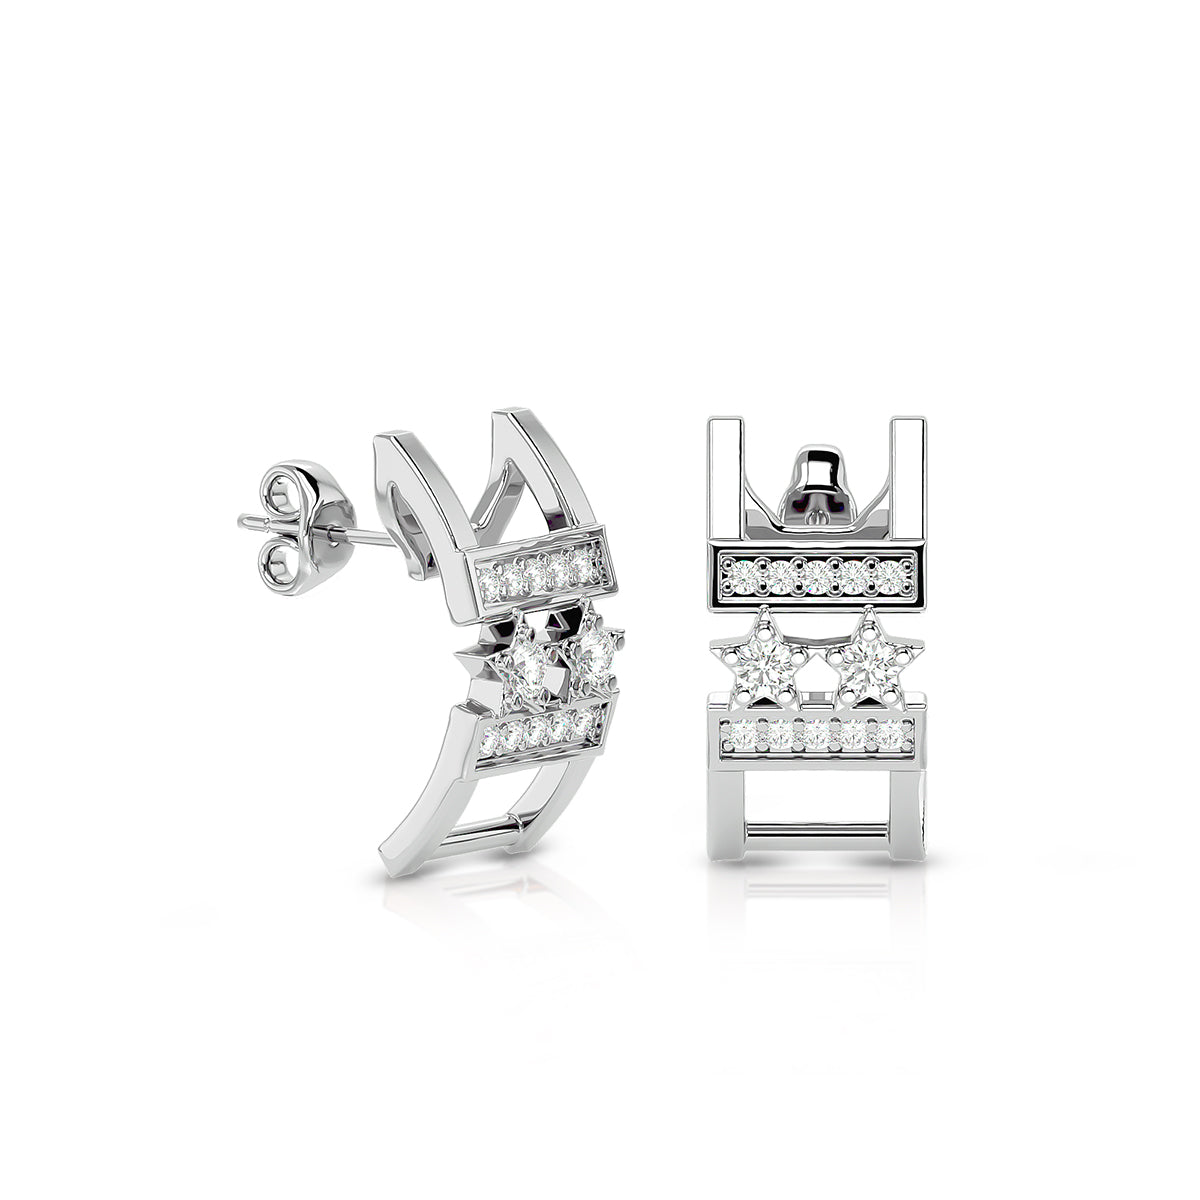 Empowerment Earrings 18K White Gold With Diamonds